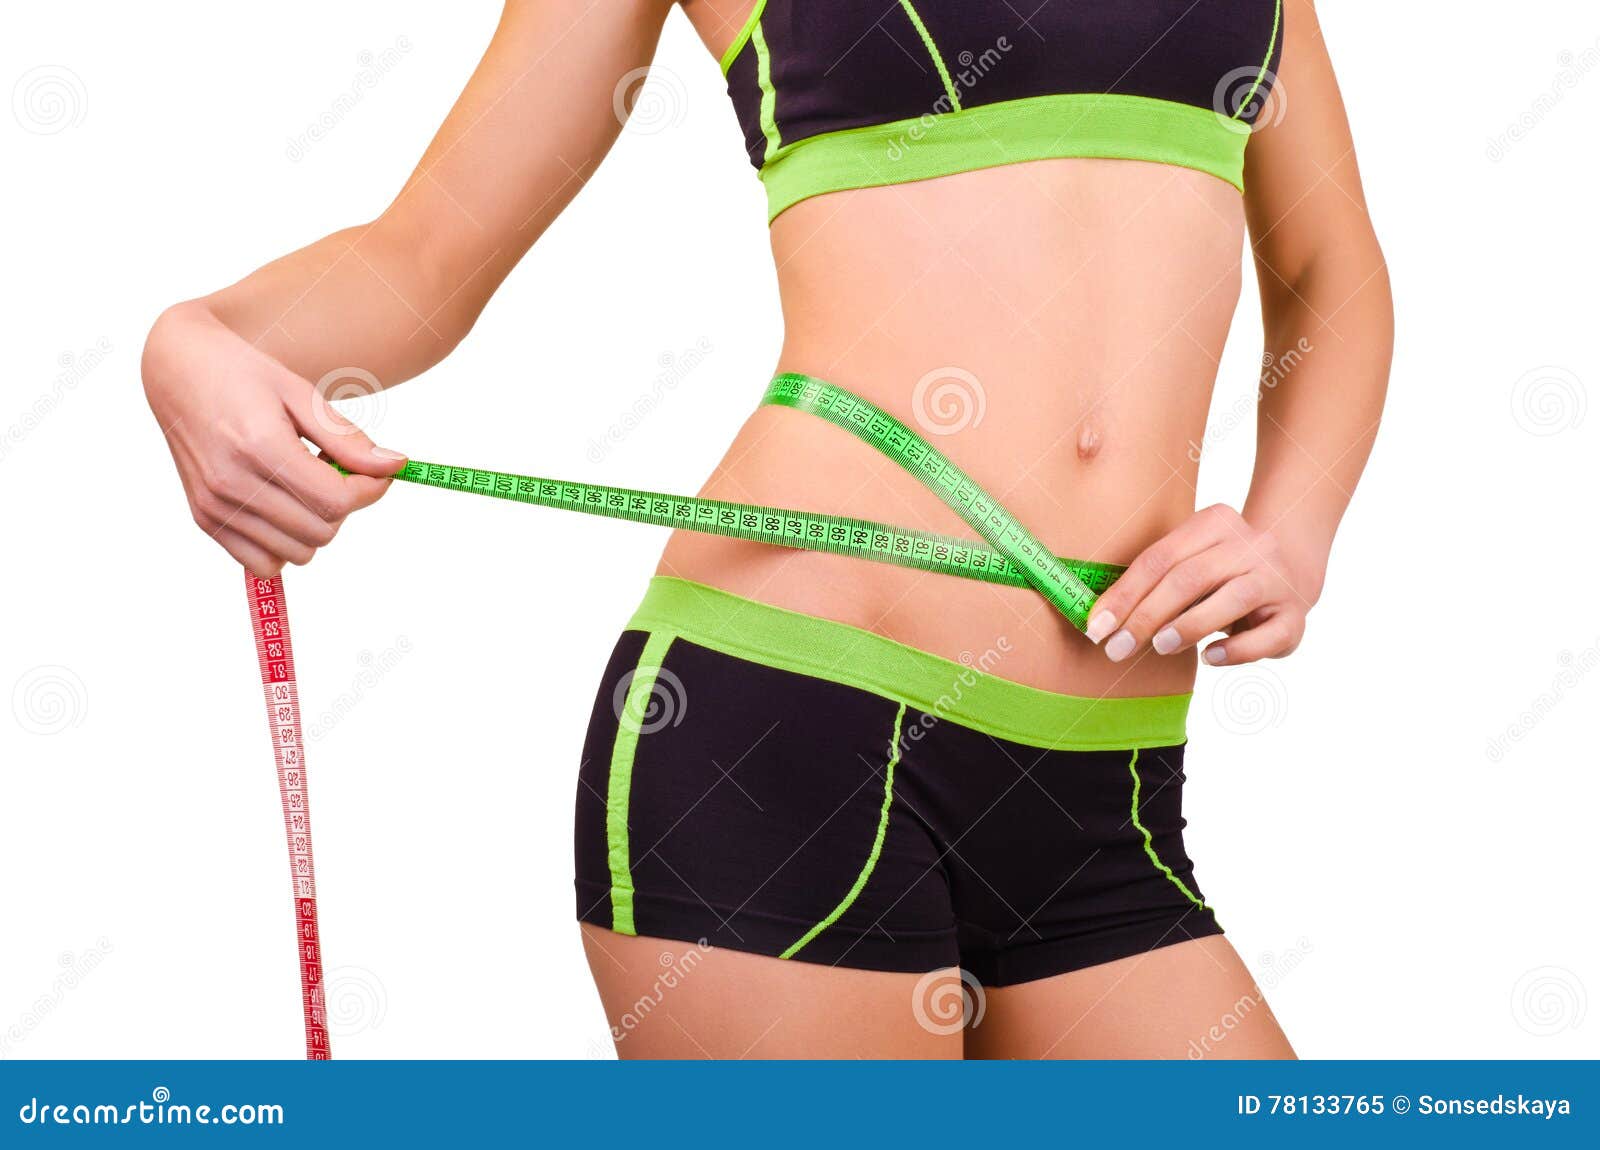 woman measures the abdominal circumference centimeter tape